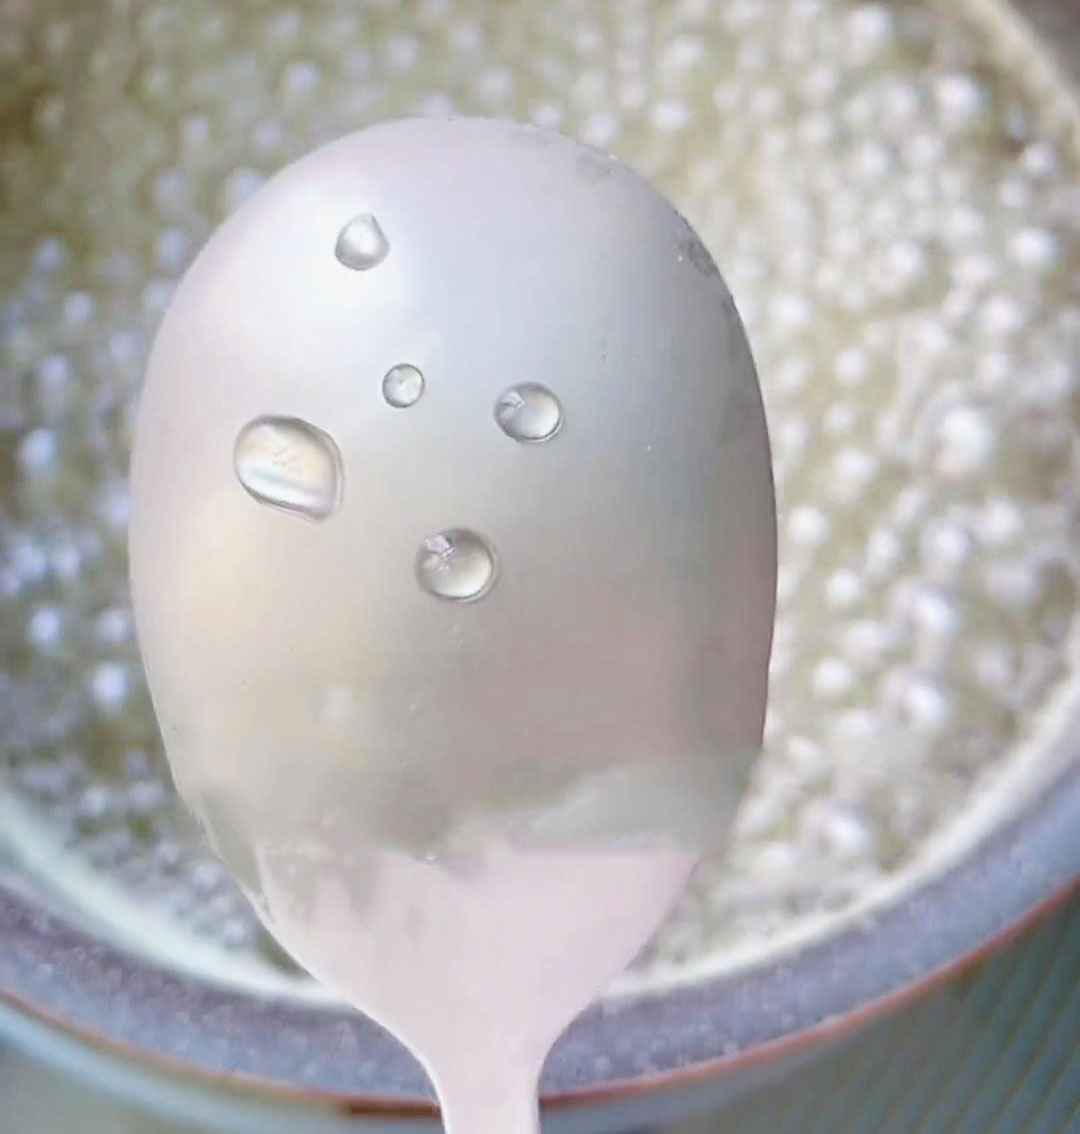 take a small drop of syrup and let it fall onto the frozen spoon